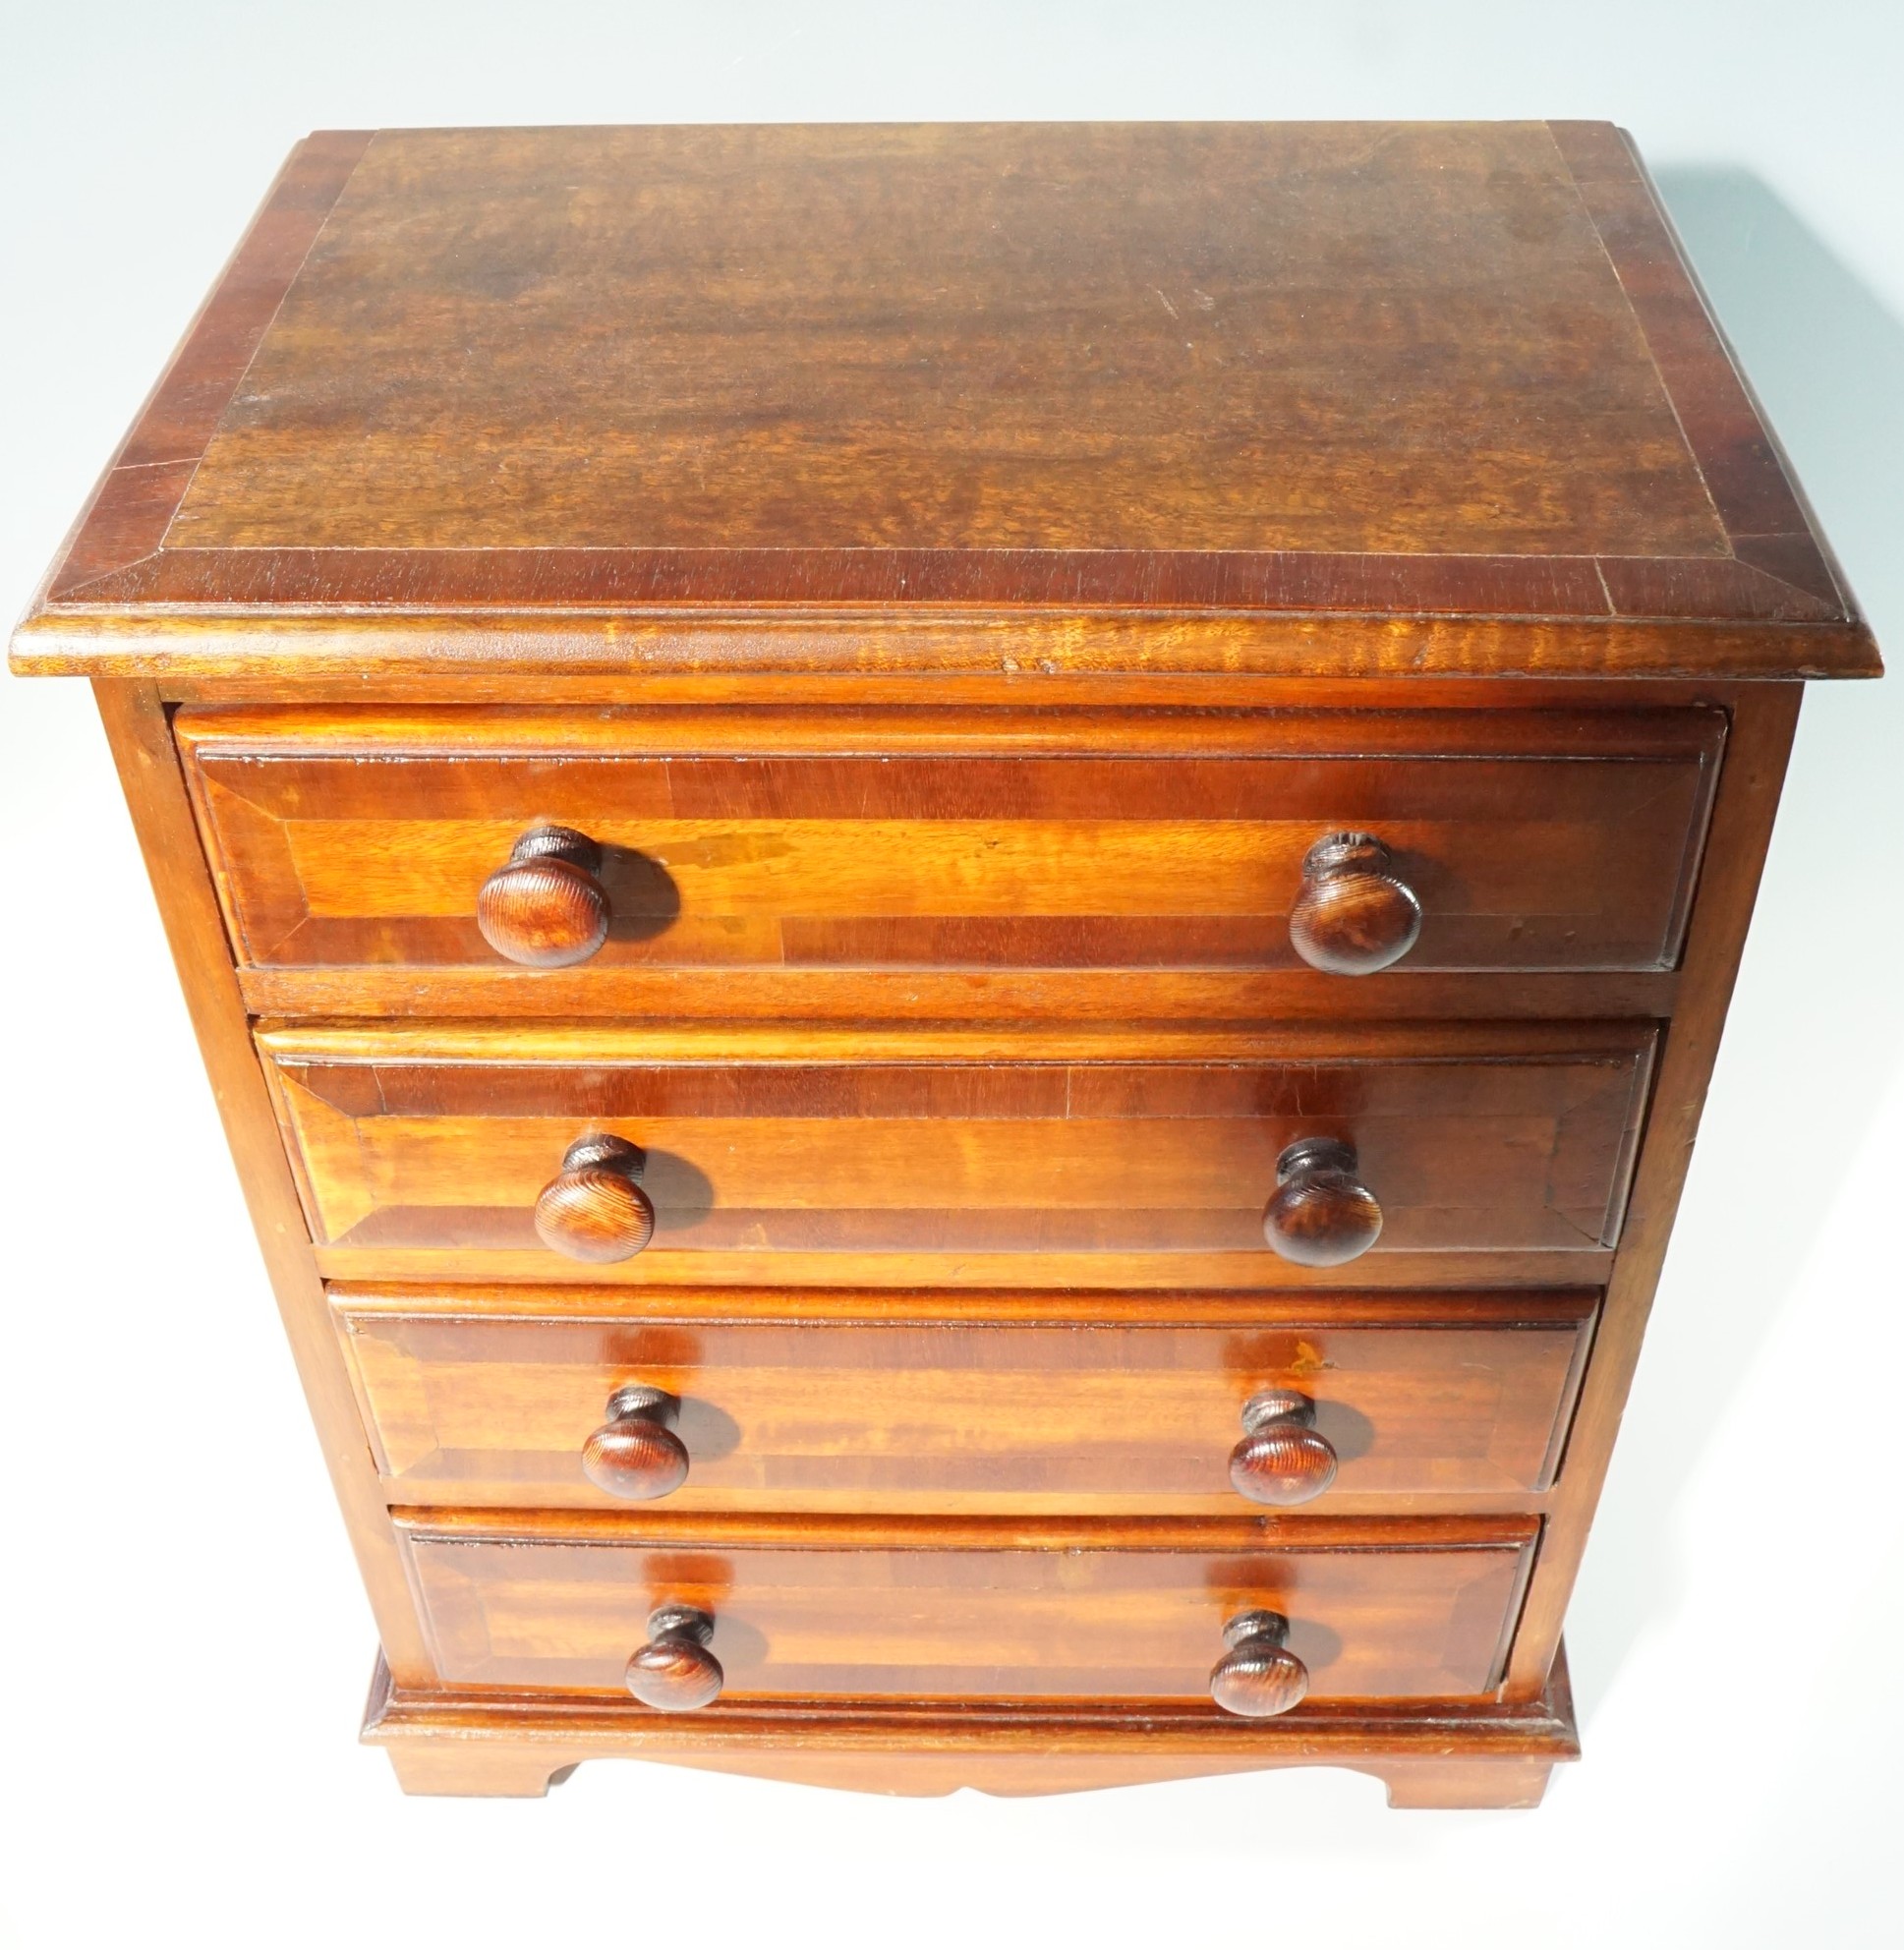 A miniature early 19th Century style mahogany cross-banded chest of drawers, 43 cm x 29 cm x 53 cm - Image 2 of 5